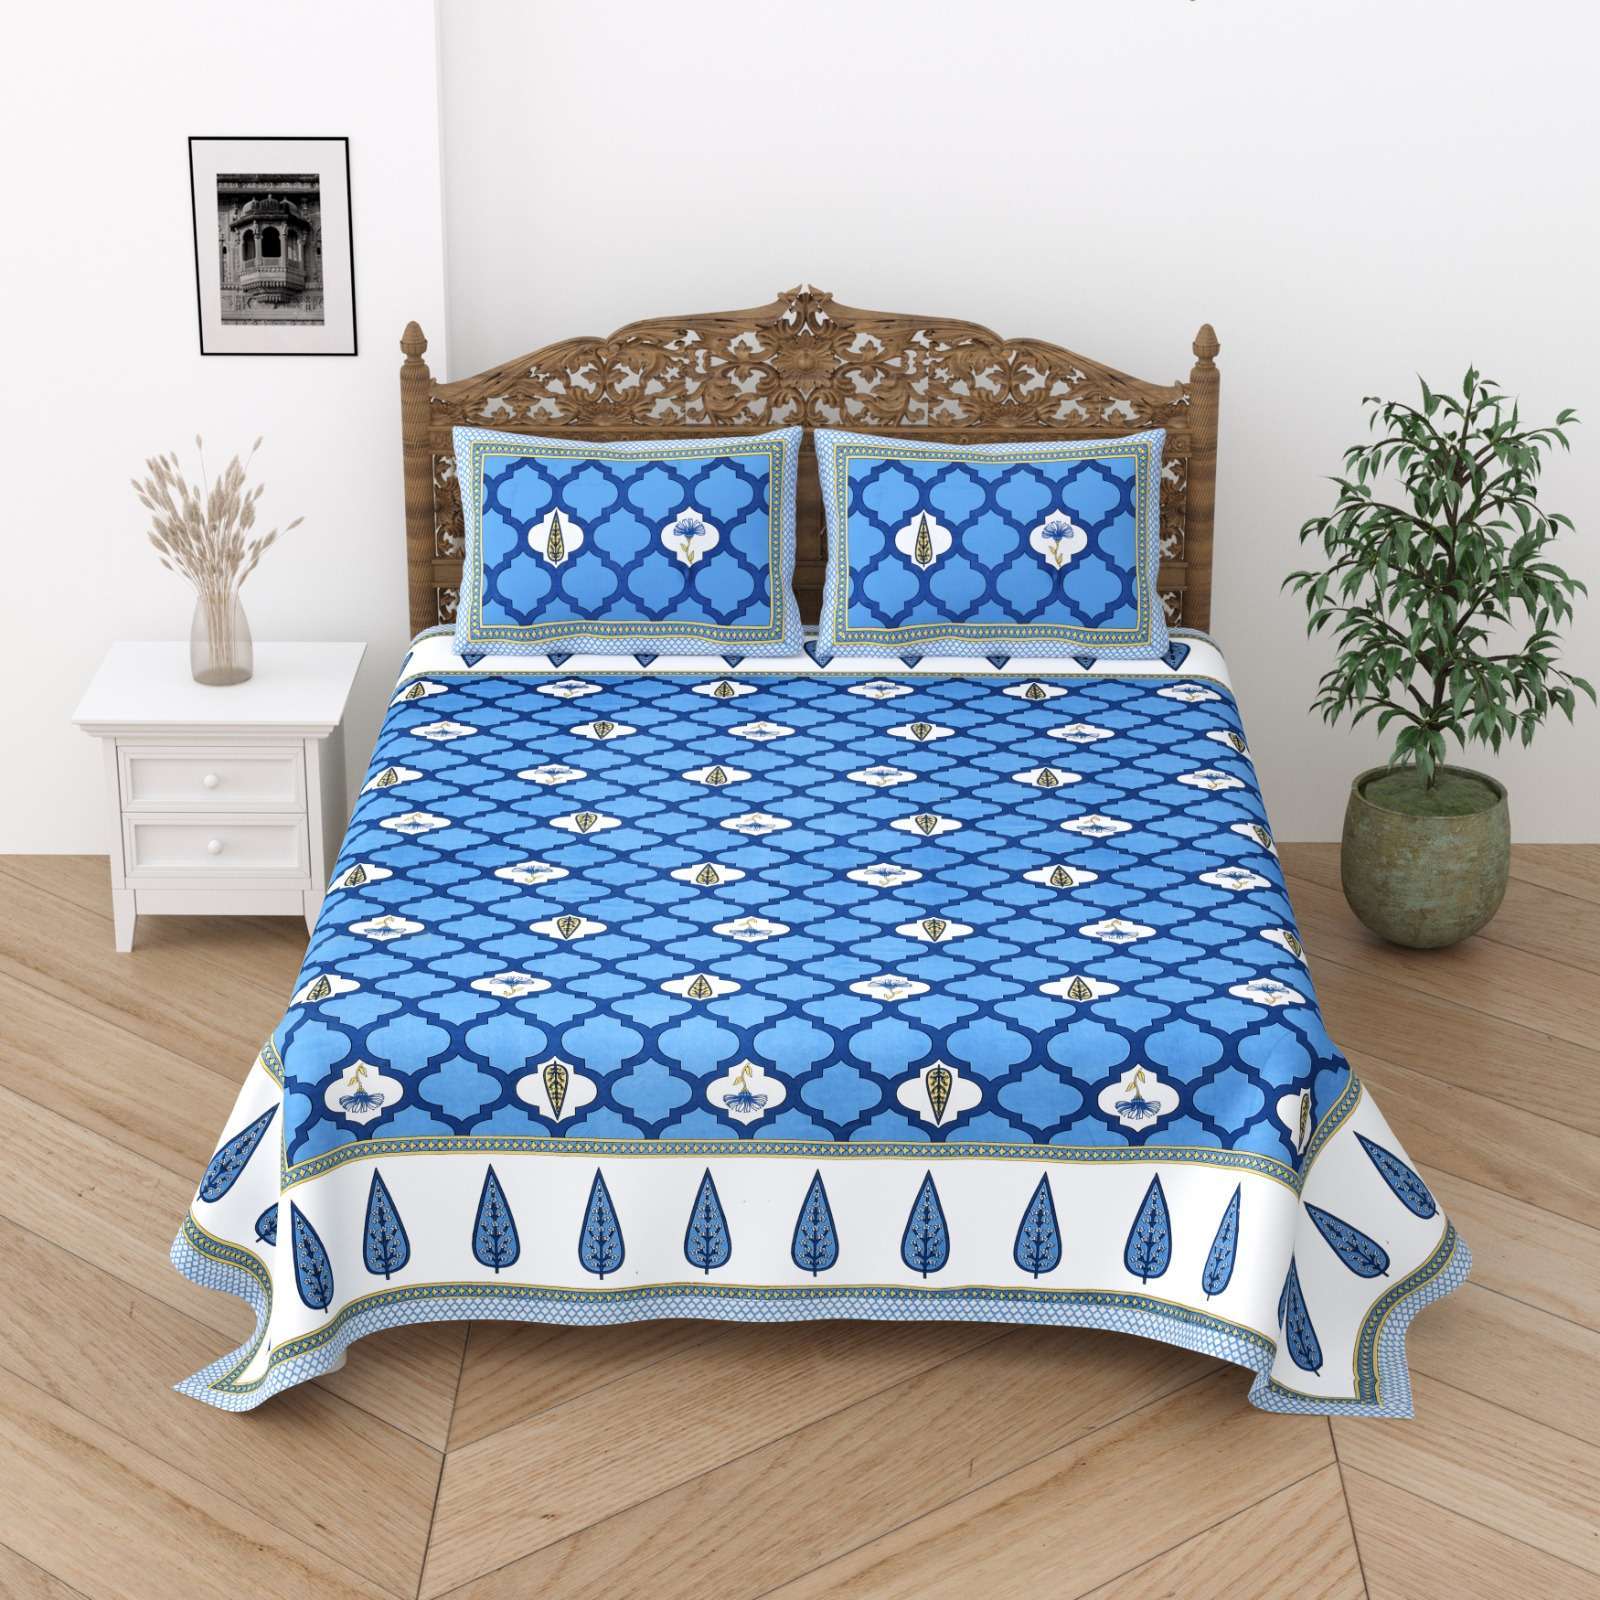 pr gangaur king size Pure Cotton bedsheet with two matching pillow cover 